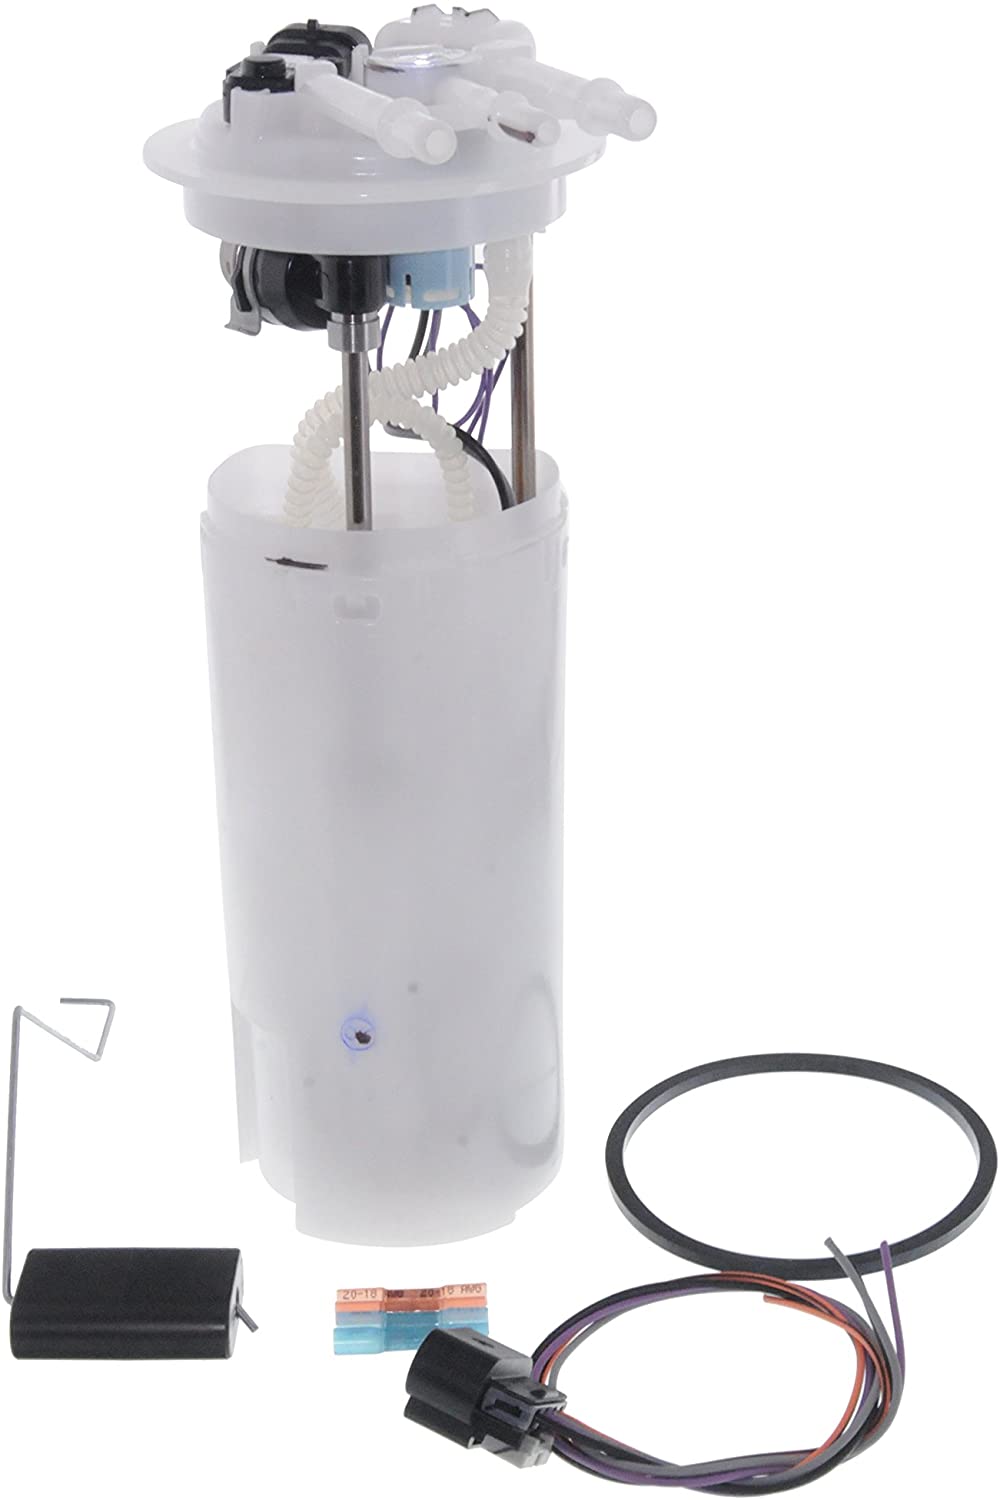 99-02 LS1 F-Body Genuine GM Complete Fuel Pump Assembly - Full Replacement Kit